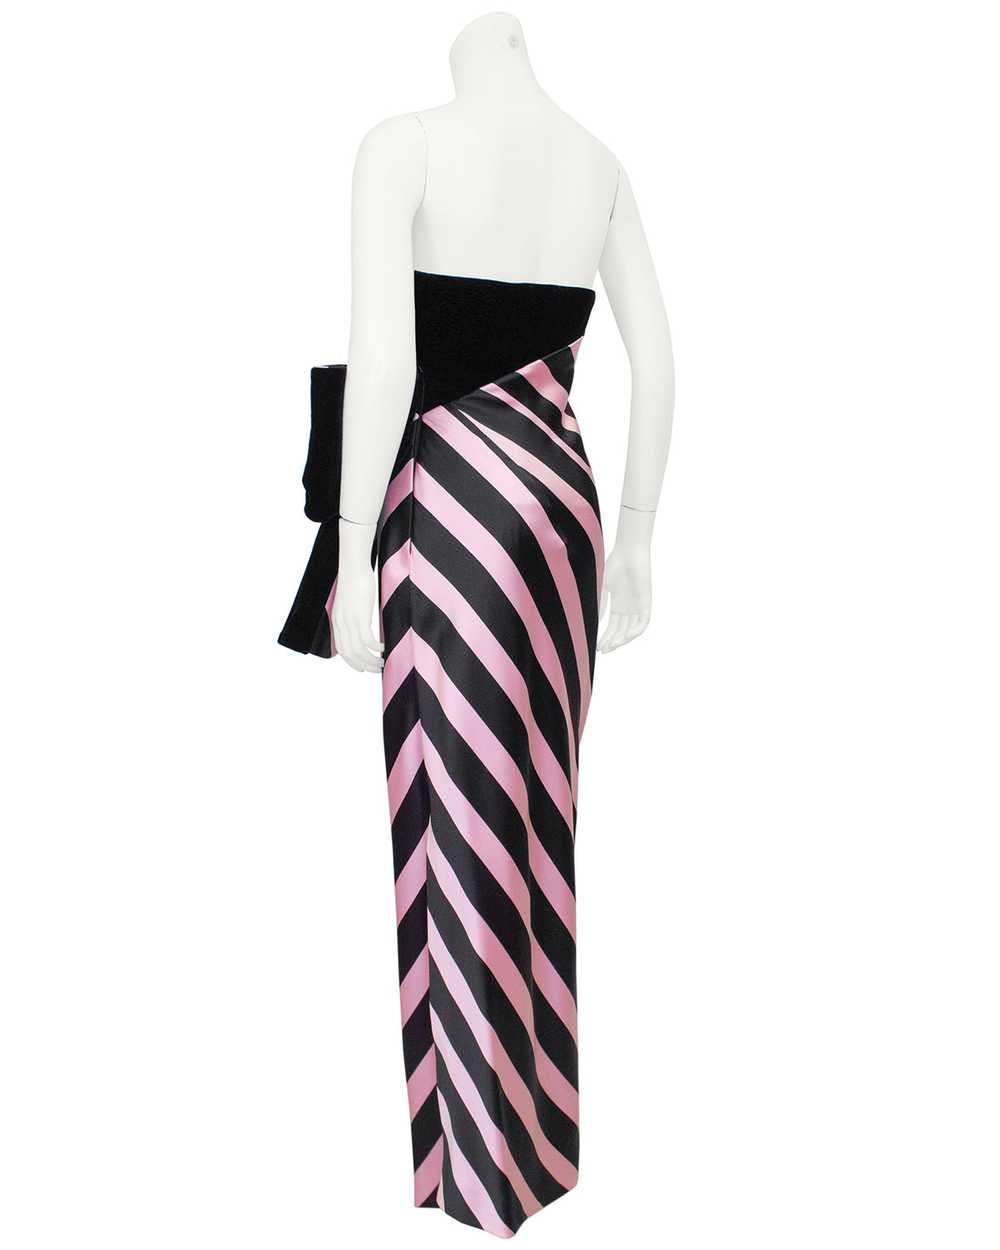 Belleville Sasoon Black and Pink Strapless Gown - image 2